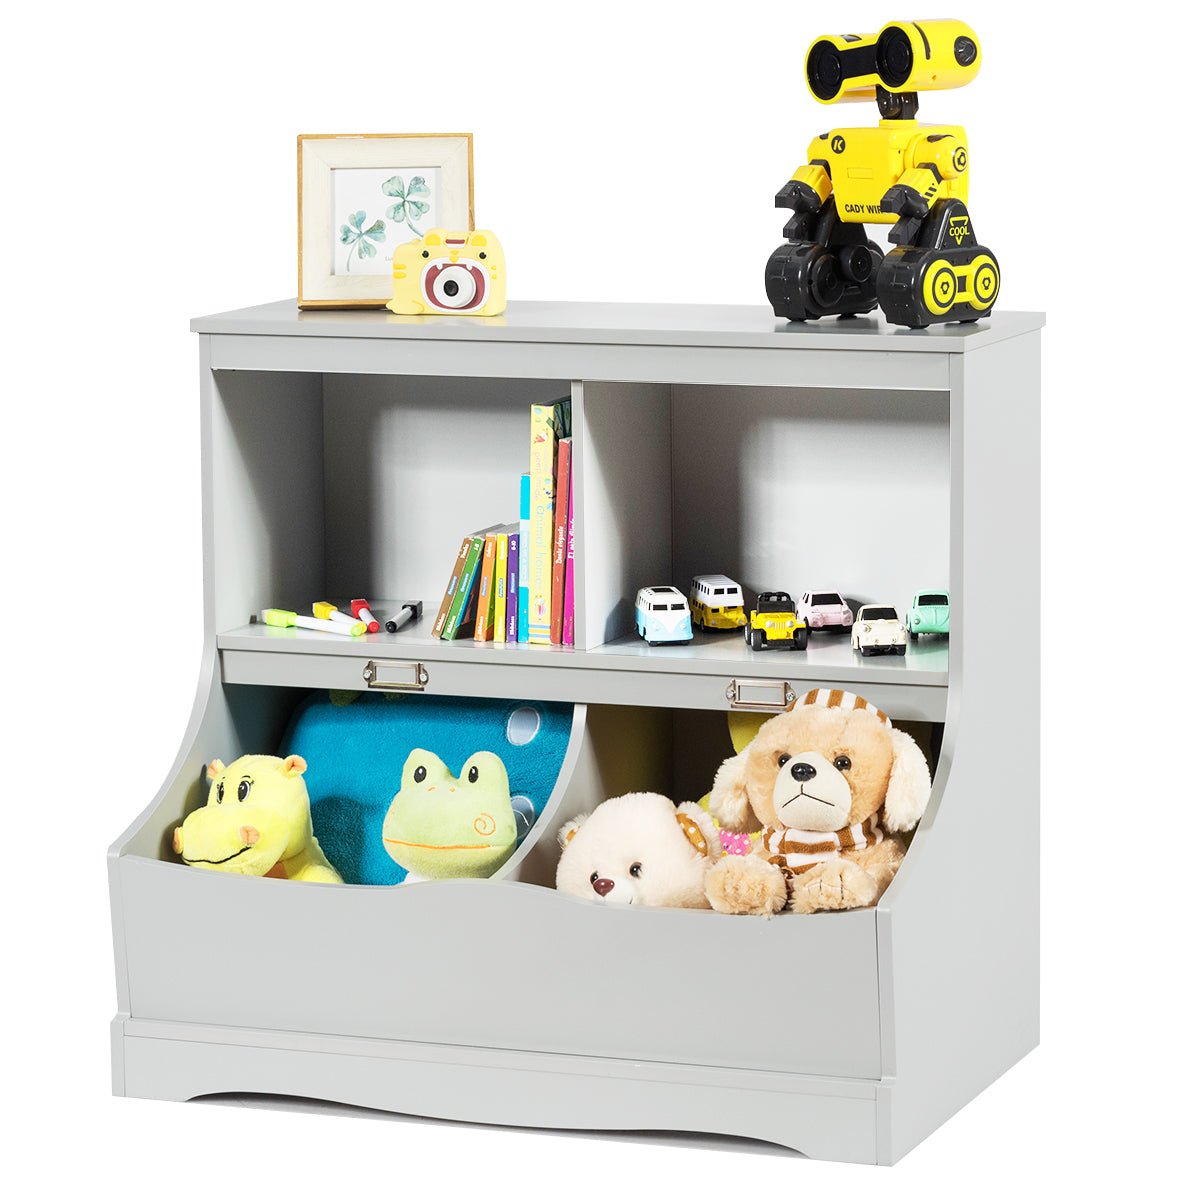 Enhance Kid's Room Decor - Grey 2 Tier Toy Shelf with Lacquer